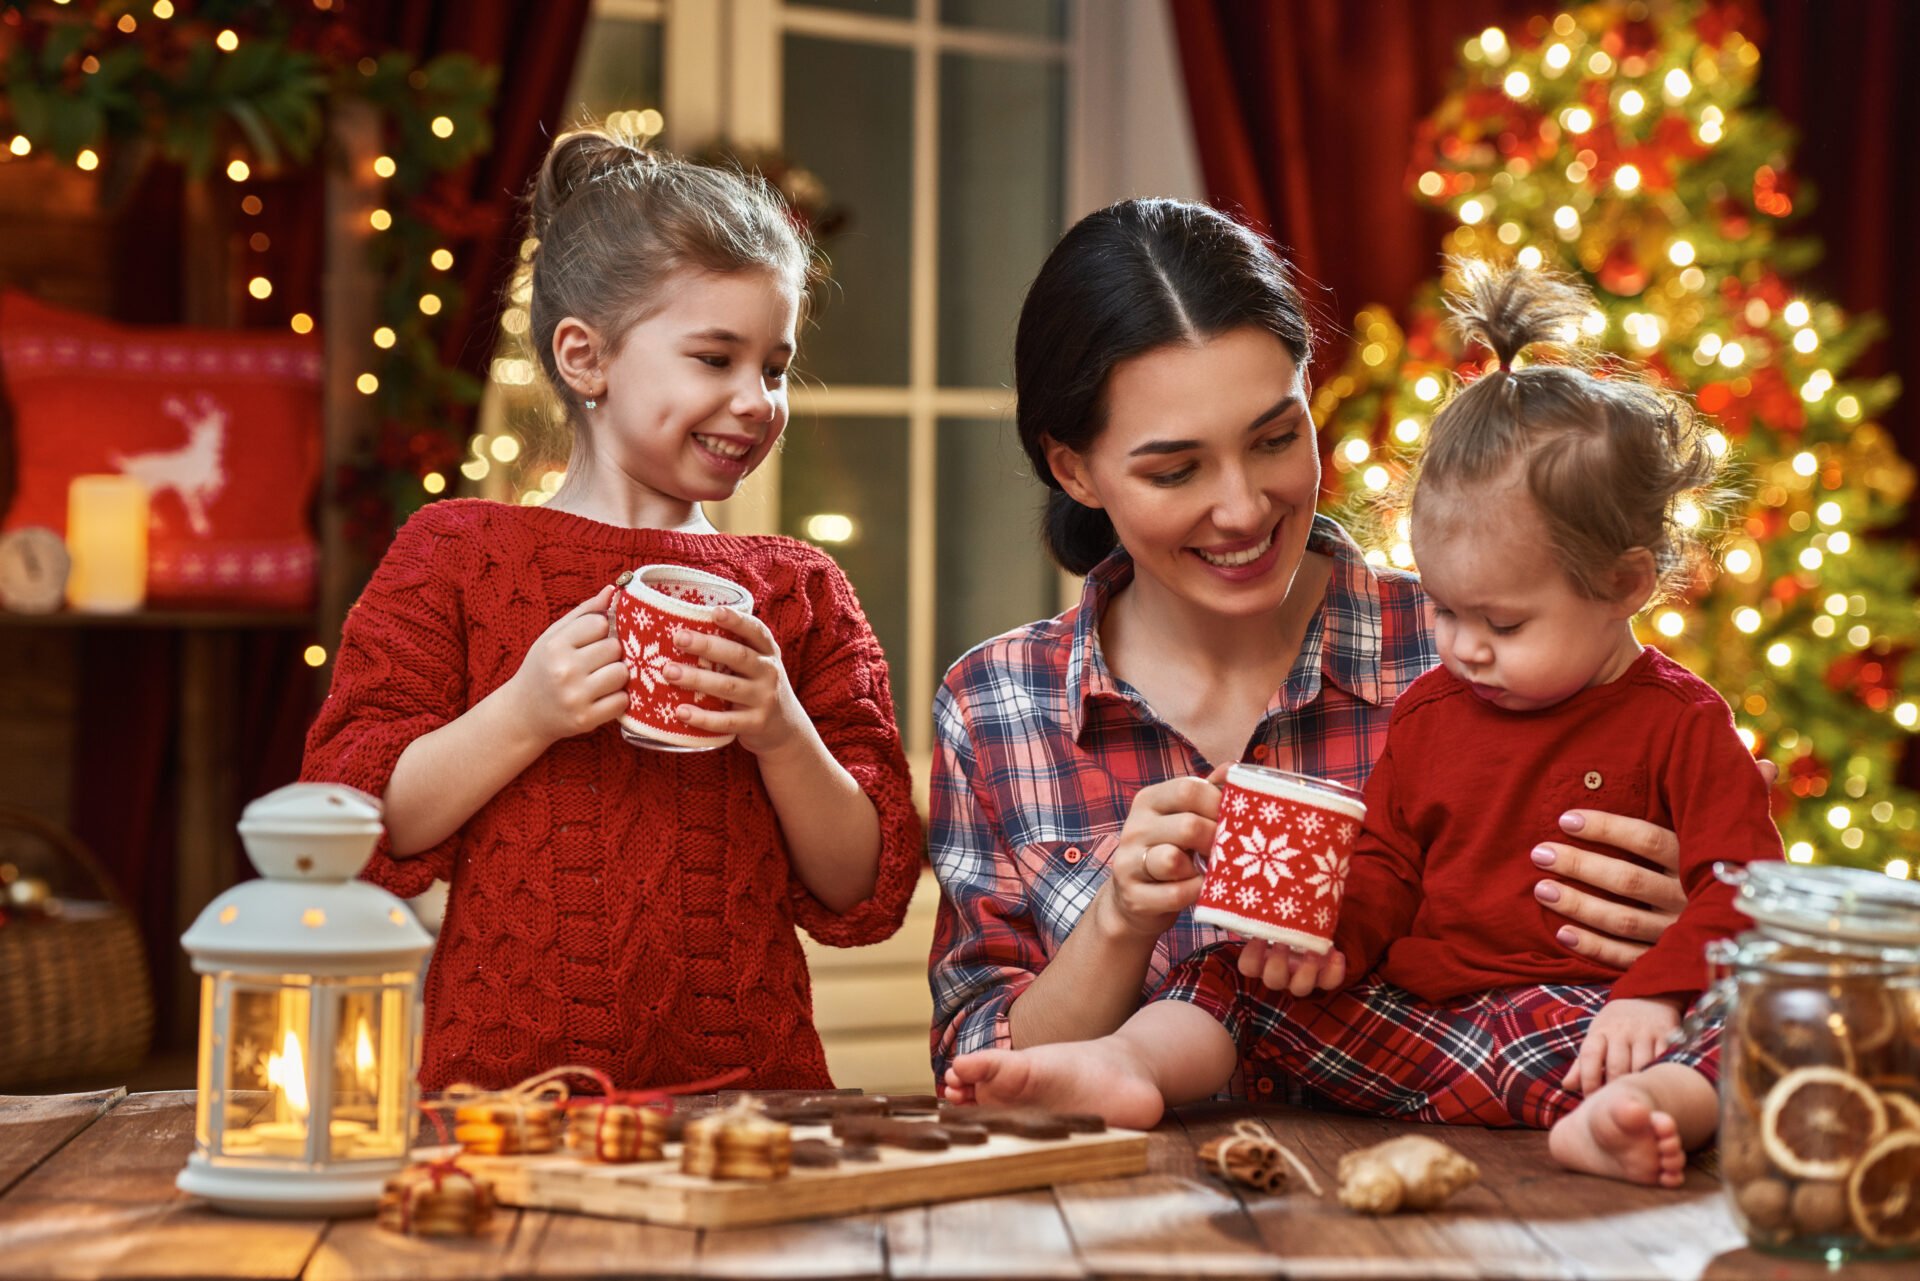 Merry Christmas and Happy Holidays. Time of family tea party. Mother and her children daughters are drinking warm tea with Christmas cookies